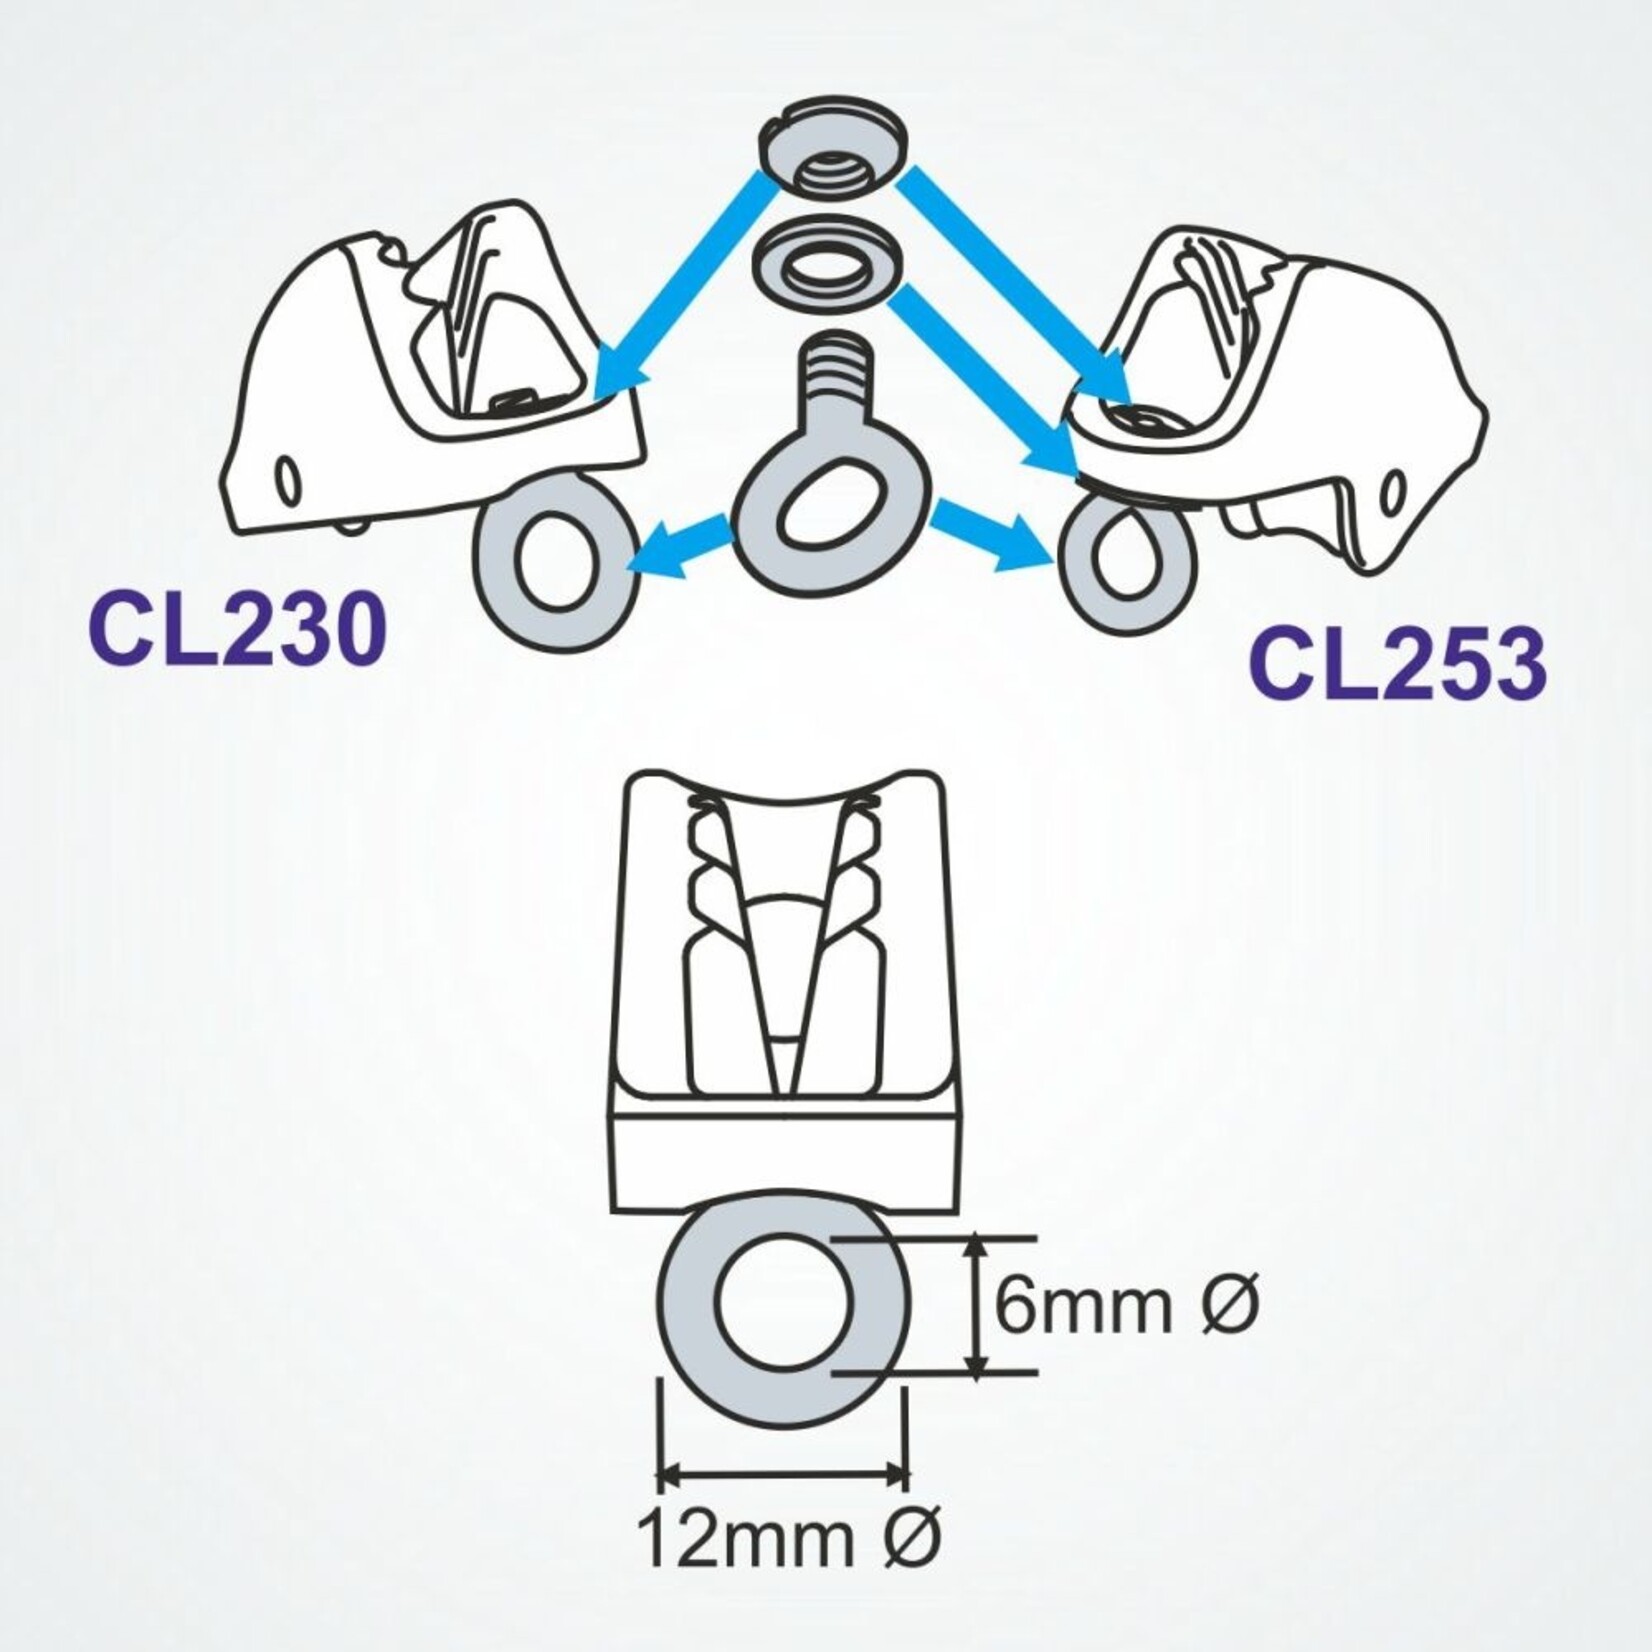 Clamcleat Rope Guide for CL230 & CL253 (Eyebolt + Nut + Washer)